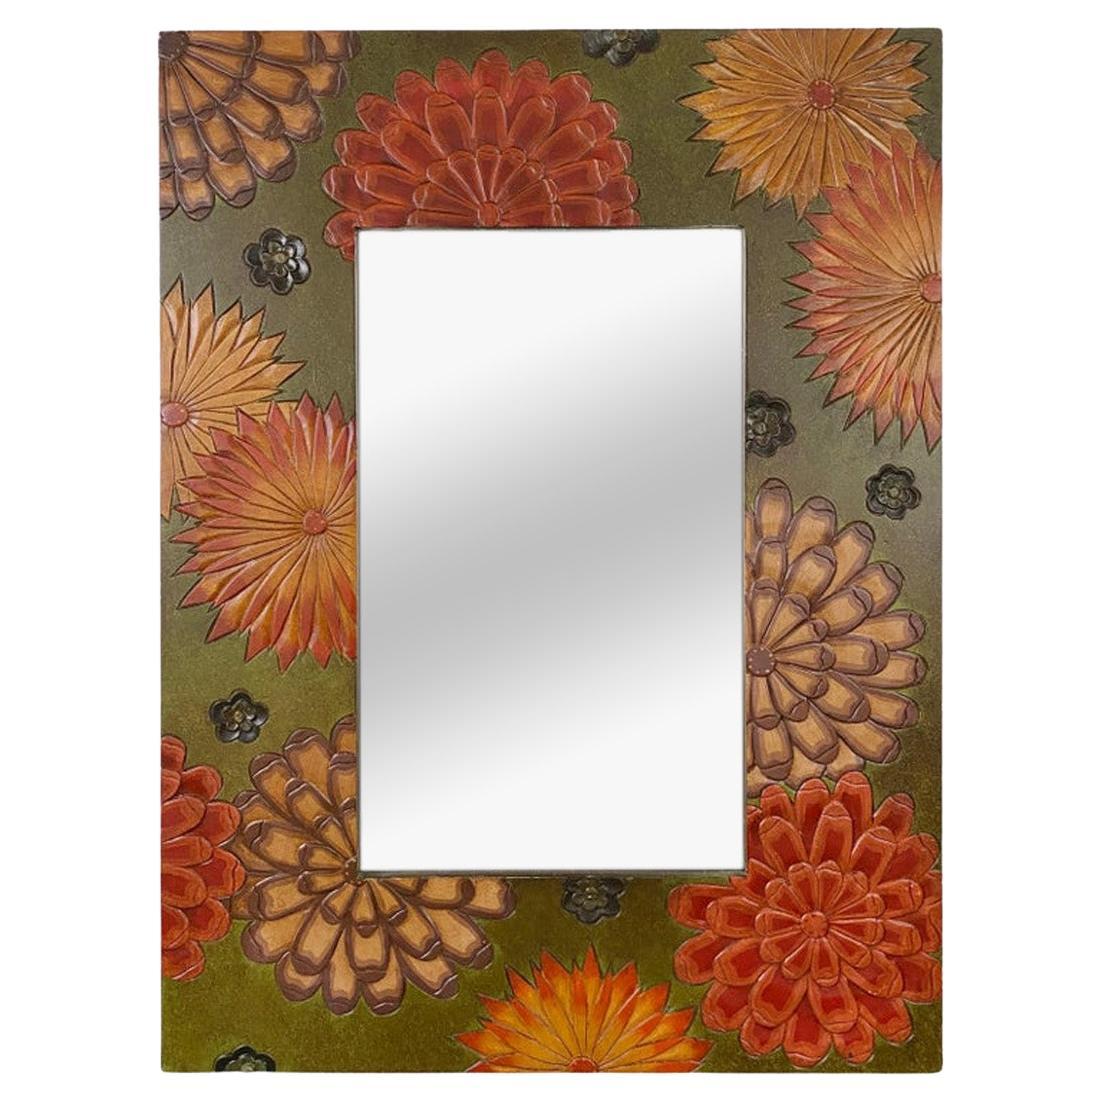 Boho Chic  Sunflowers Design Wall or Vanity Mirror with Wooden Carved Frame 